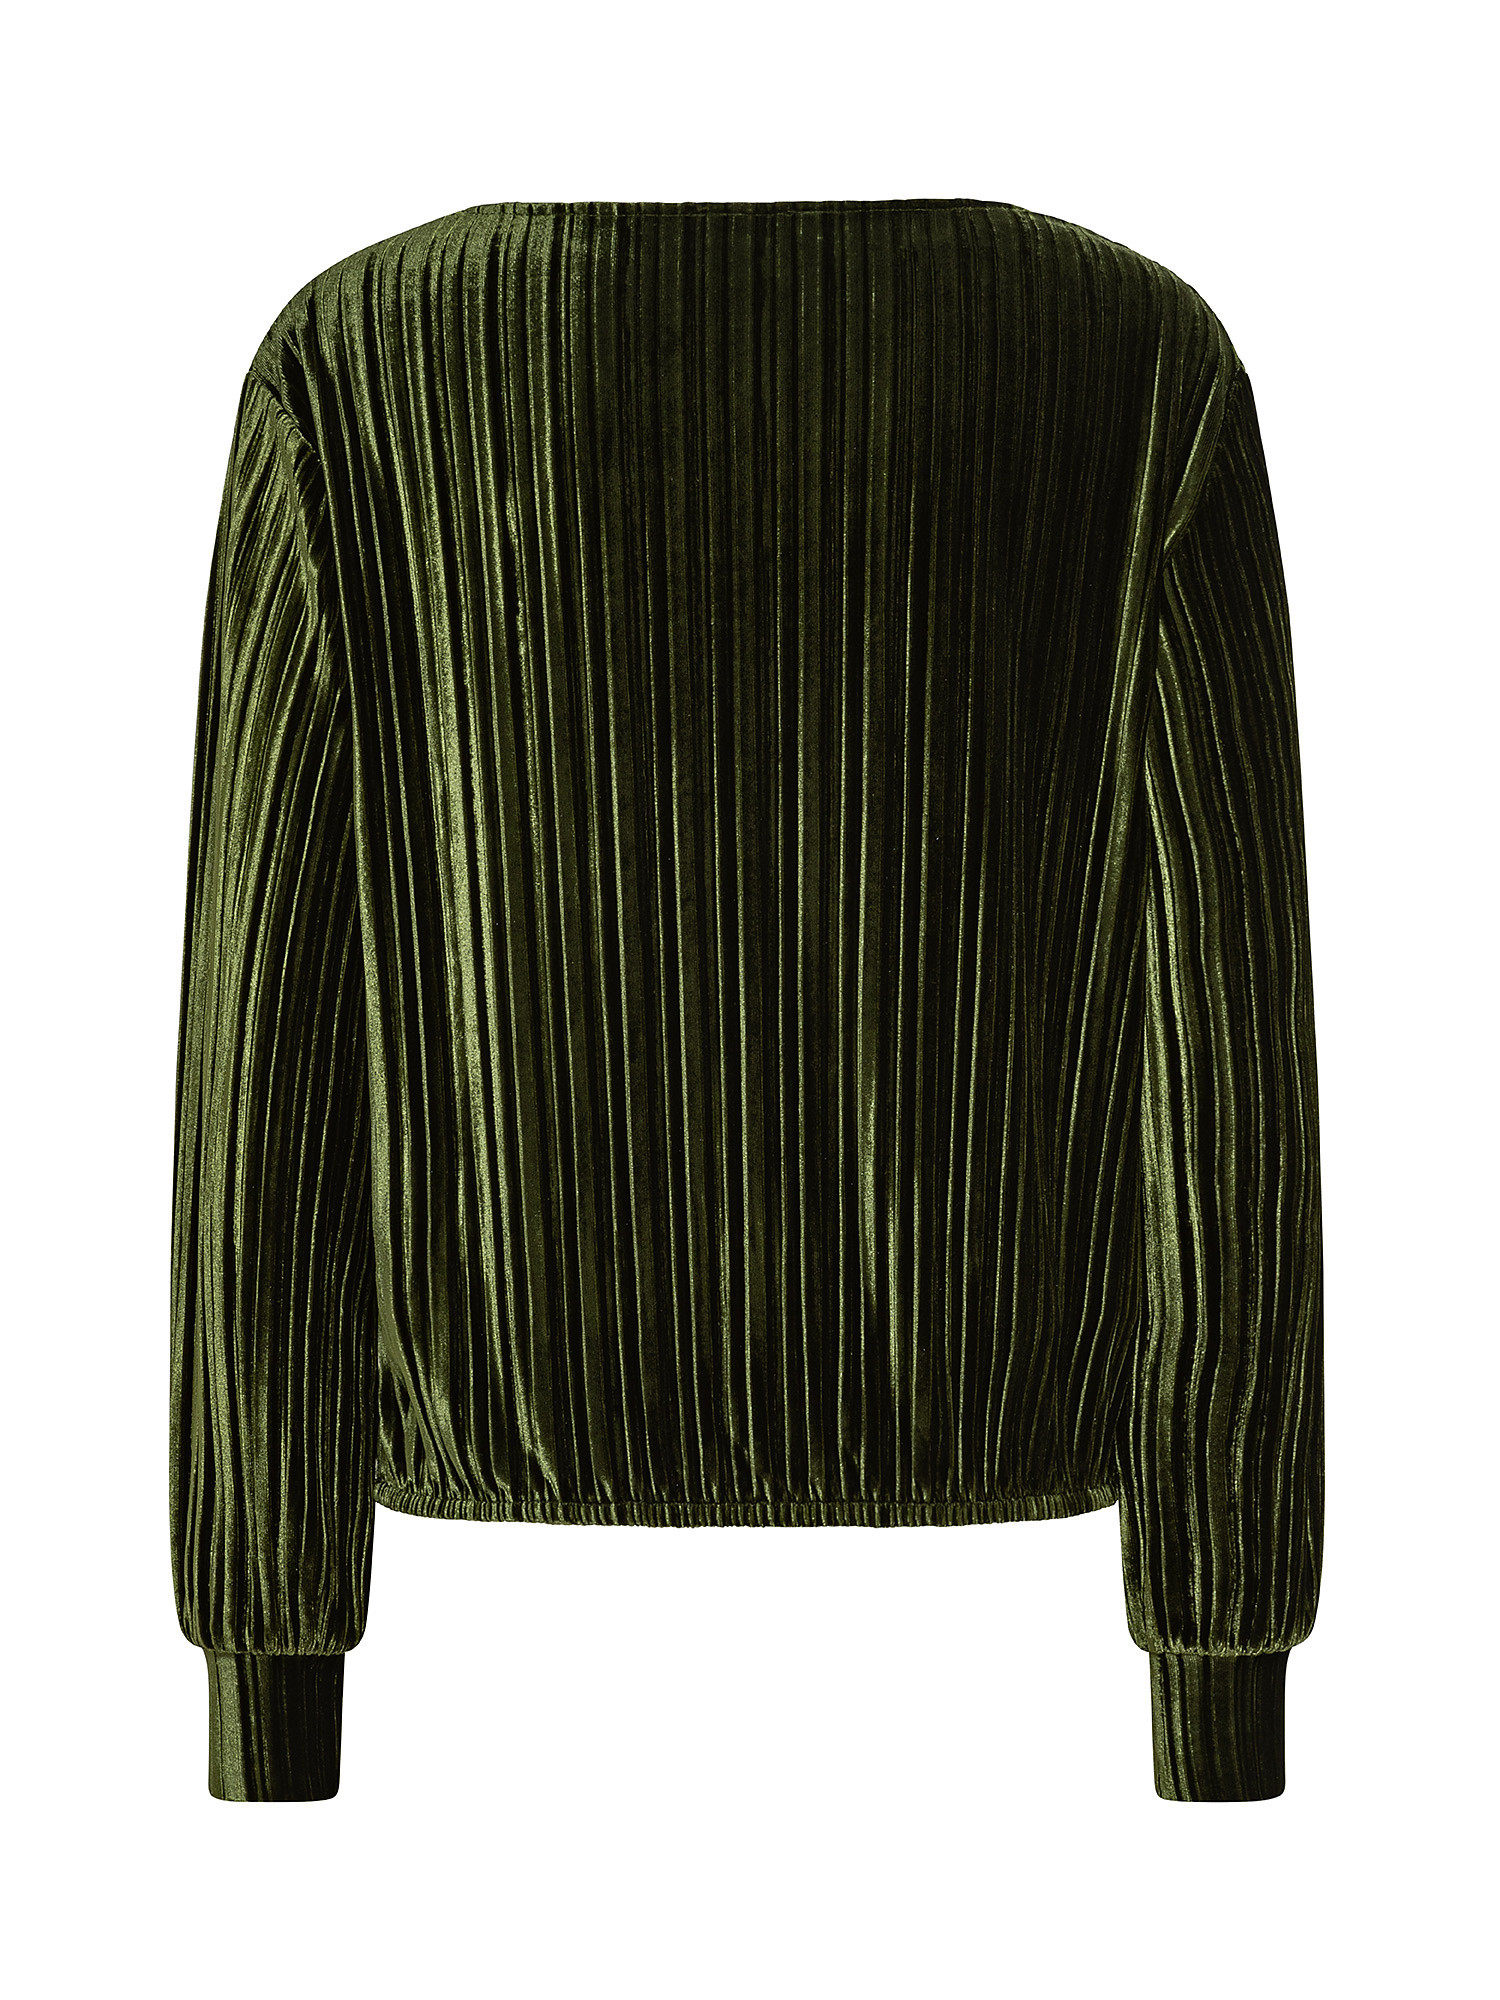 Pleated velor T-shirt, Green, large image number 1